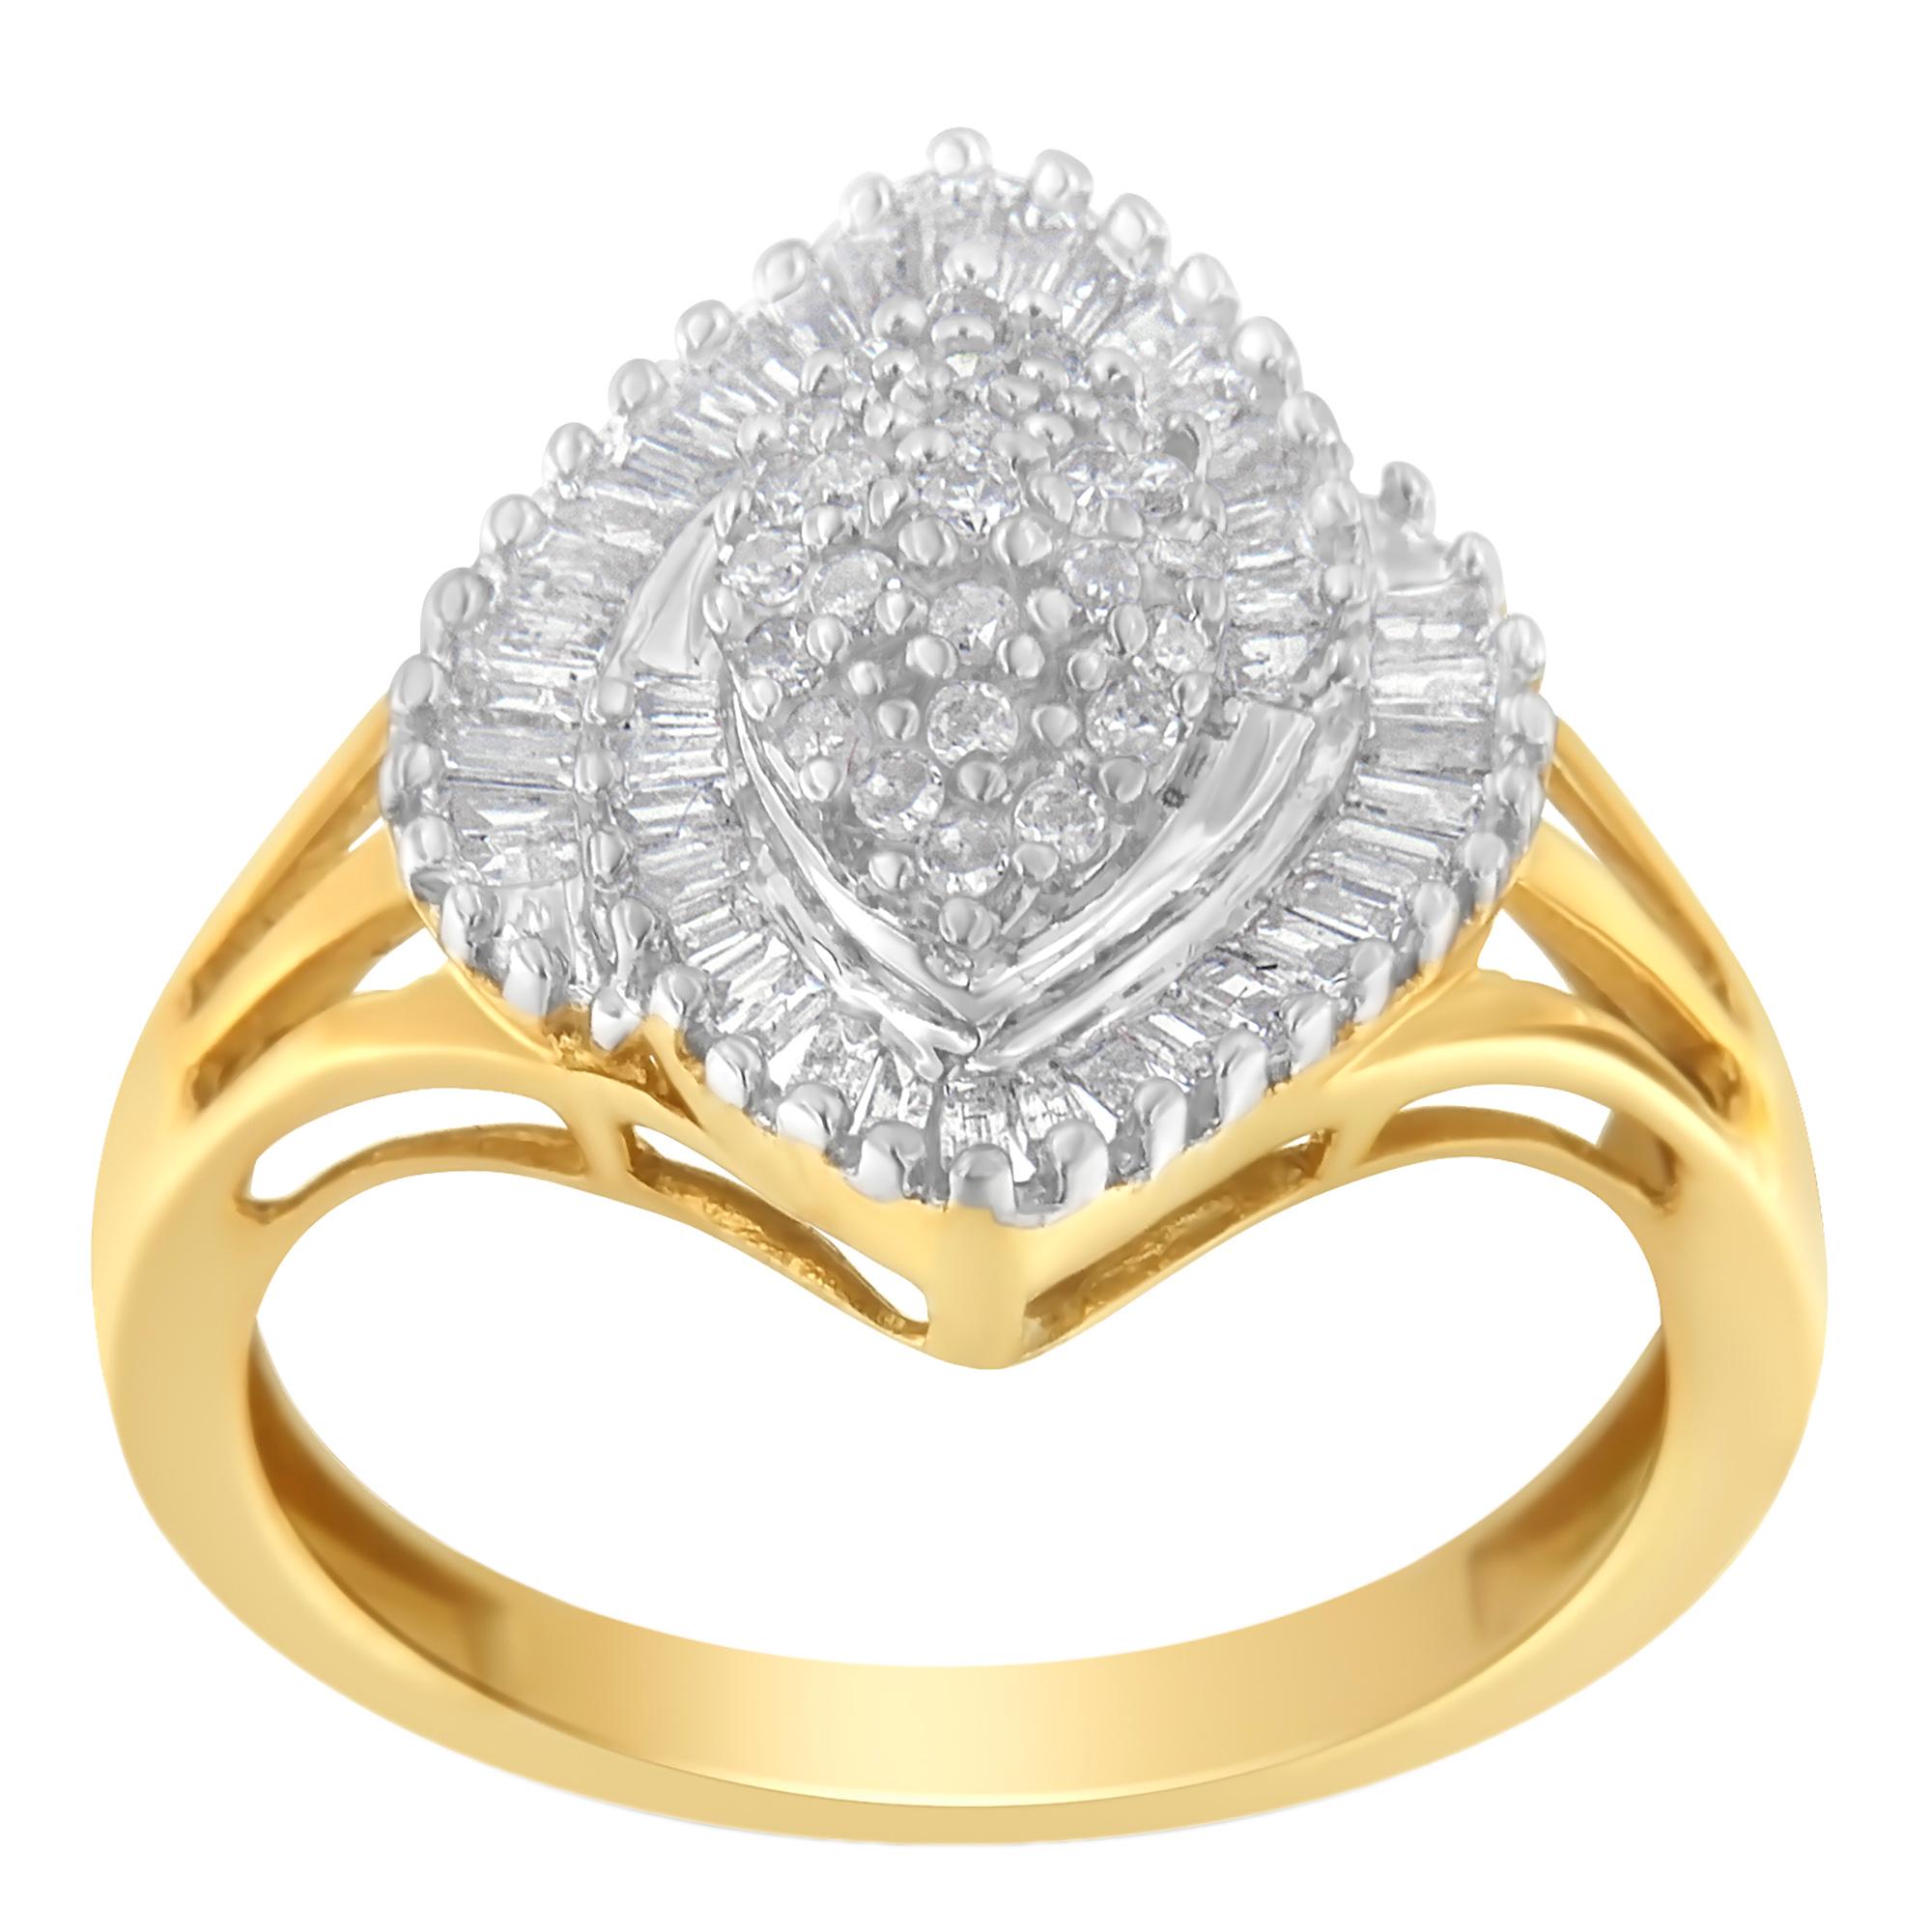 For Sale:  10K Yellow Gold 1/2 Carat Diamond Cocktail Ring 3